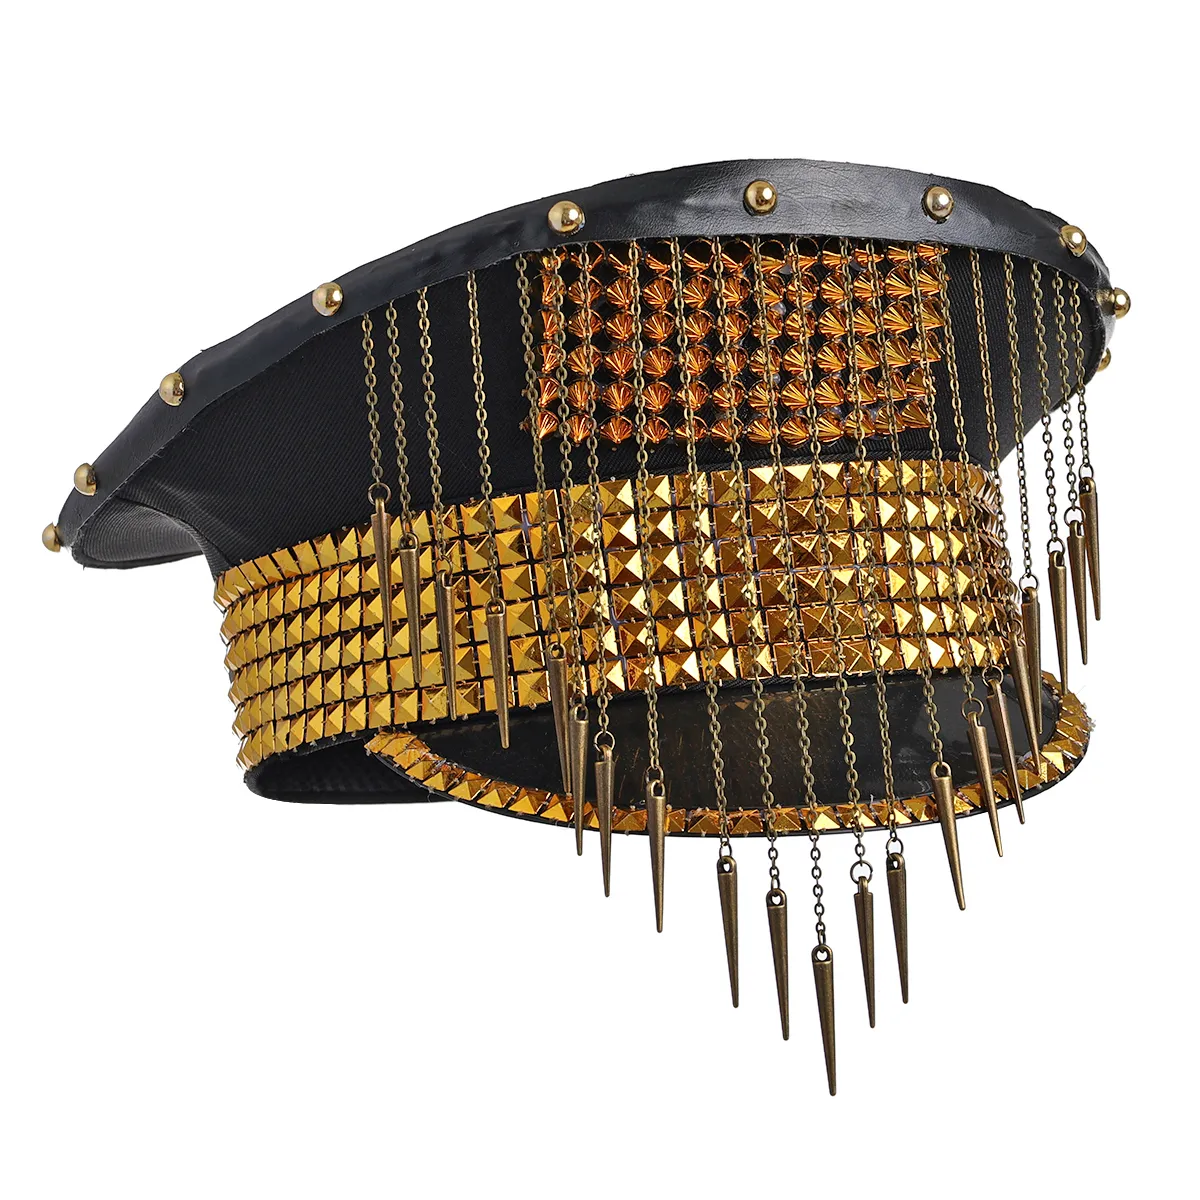 Rhinestone Sequin Beret With Spikes For Women Burning Man Festival Military  Captain Hat With Rivet Detailing Steampunk Cosplay Headwear From  Shen012001, $44.63